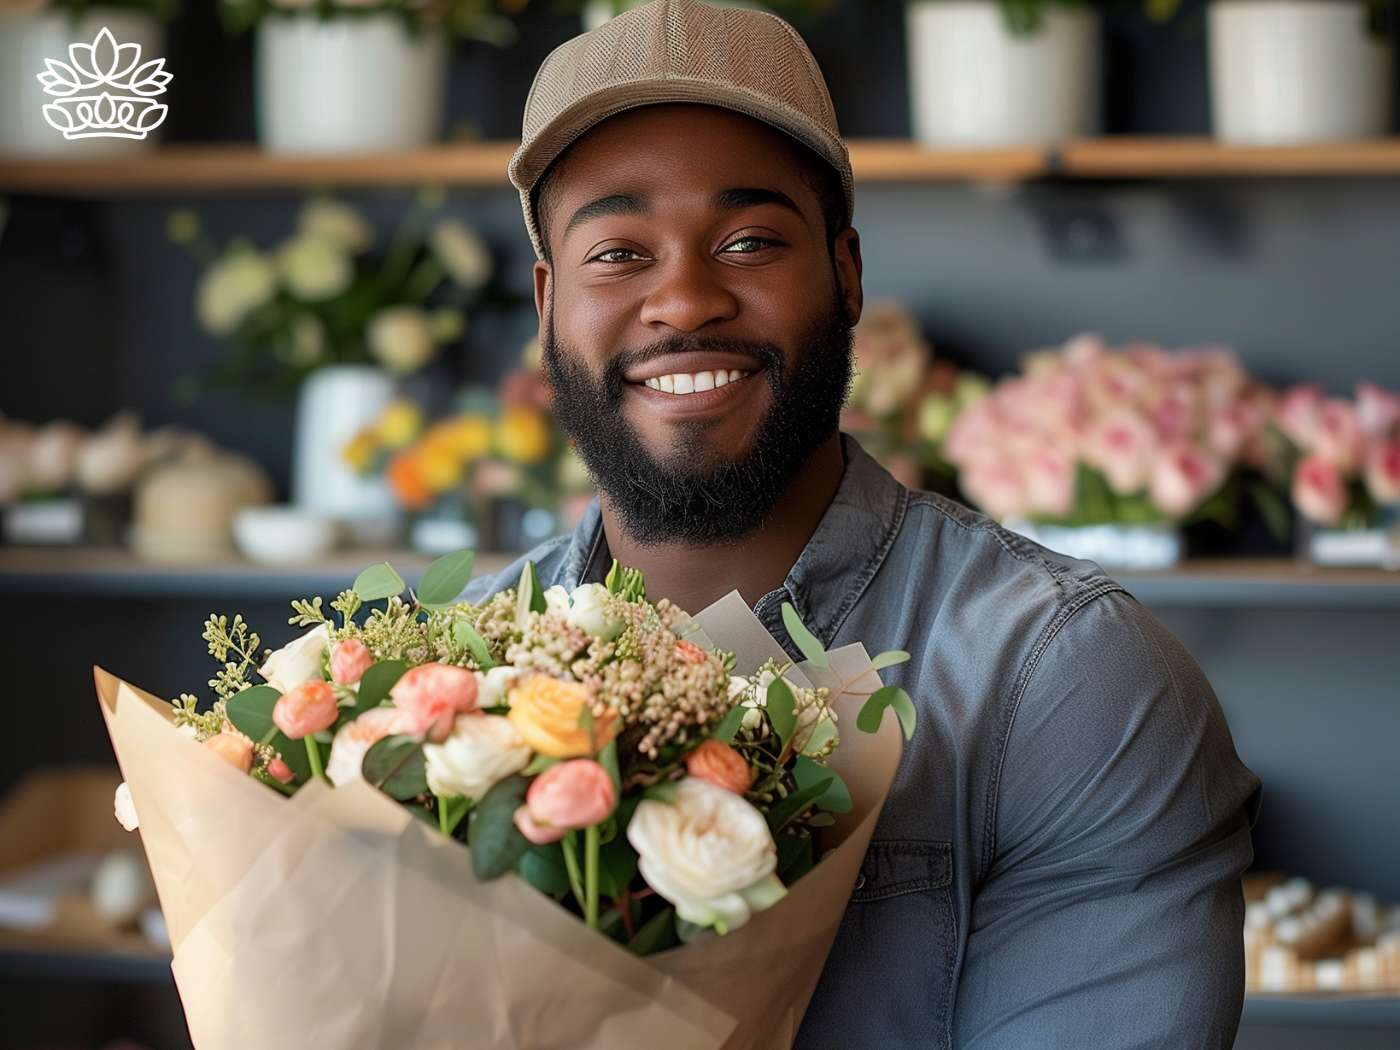 Cheerful man with a radiant smile presenting a bouquet of mixed flowers in a craft paper wrap at a florist's shop, Fabulous Flowers and Gifts.